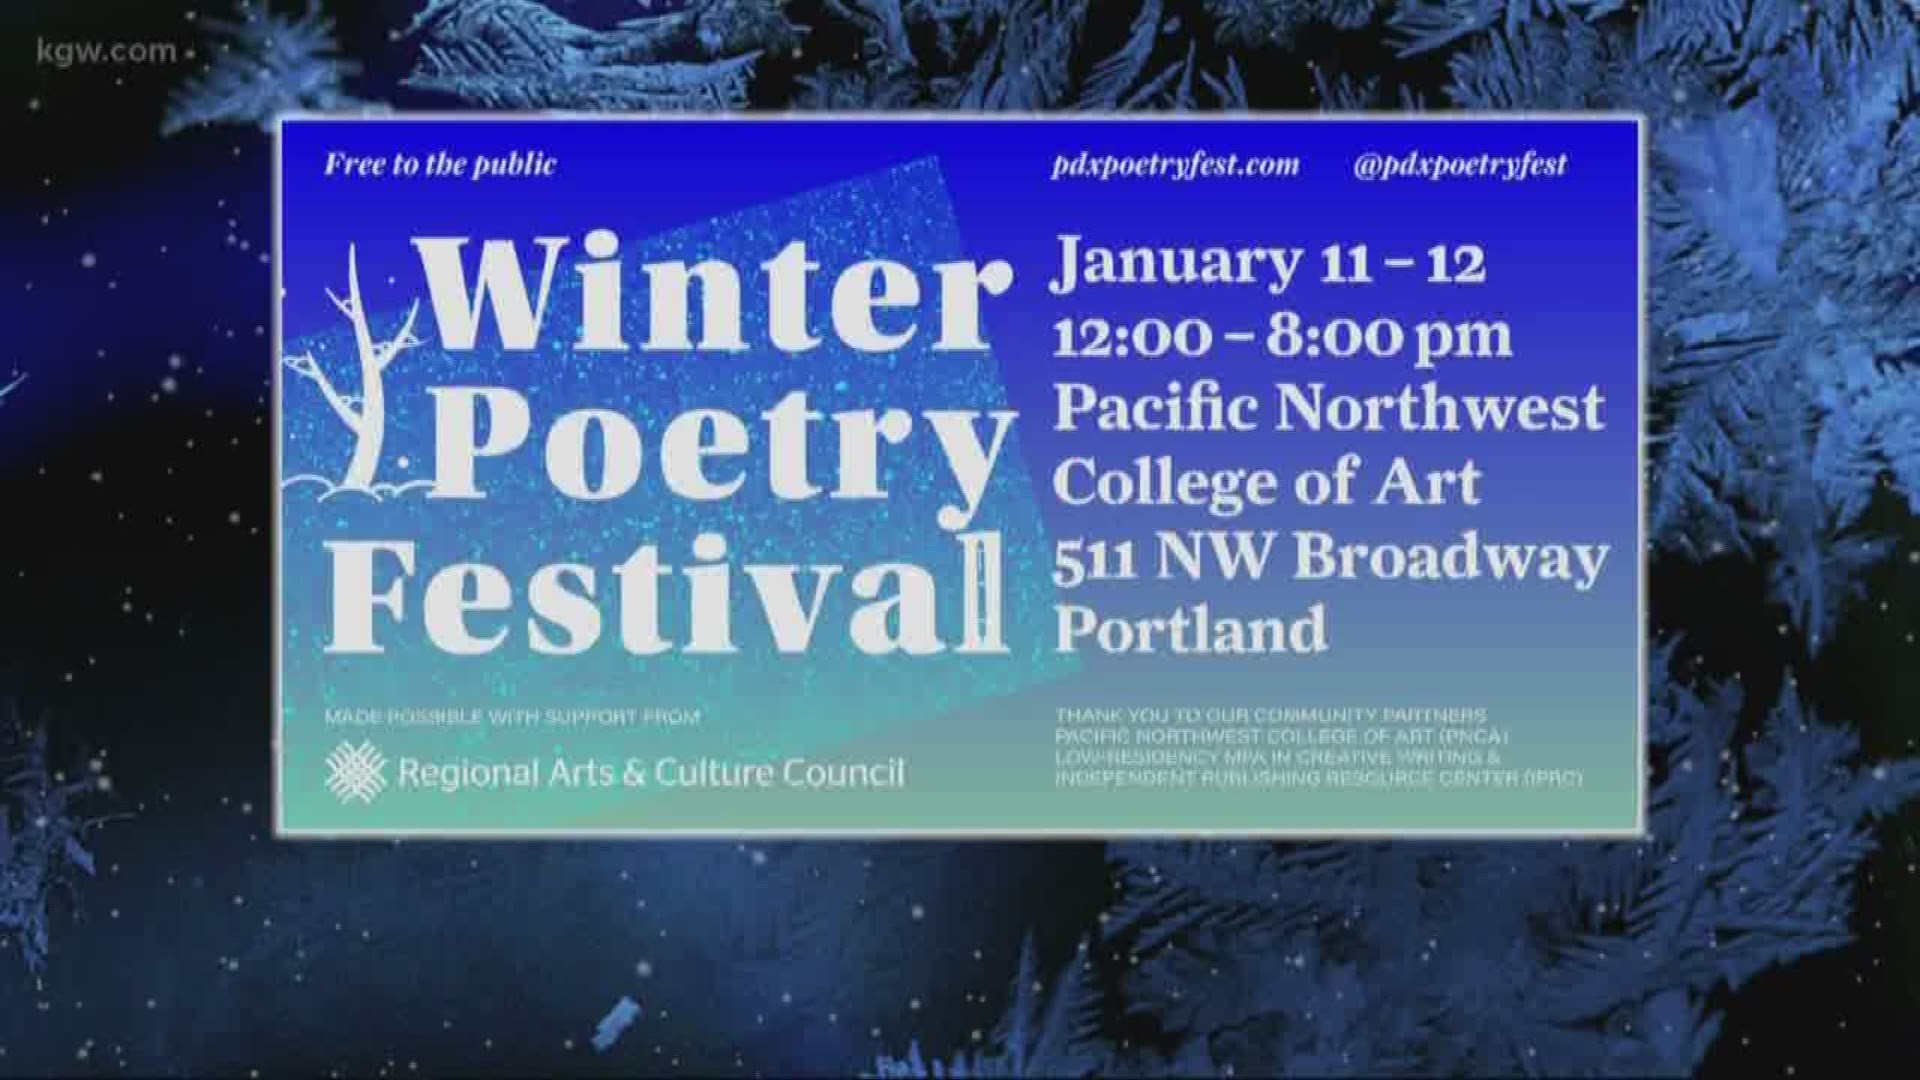 The Portland Winter Poetry Festival has even more  to offer this year, including visual poetry.
pdxpoetryfest.com
#TonightwithCassidy